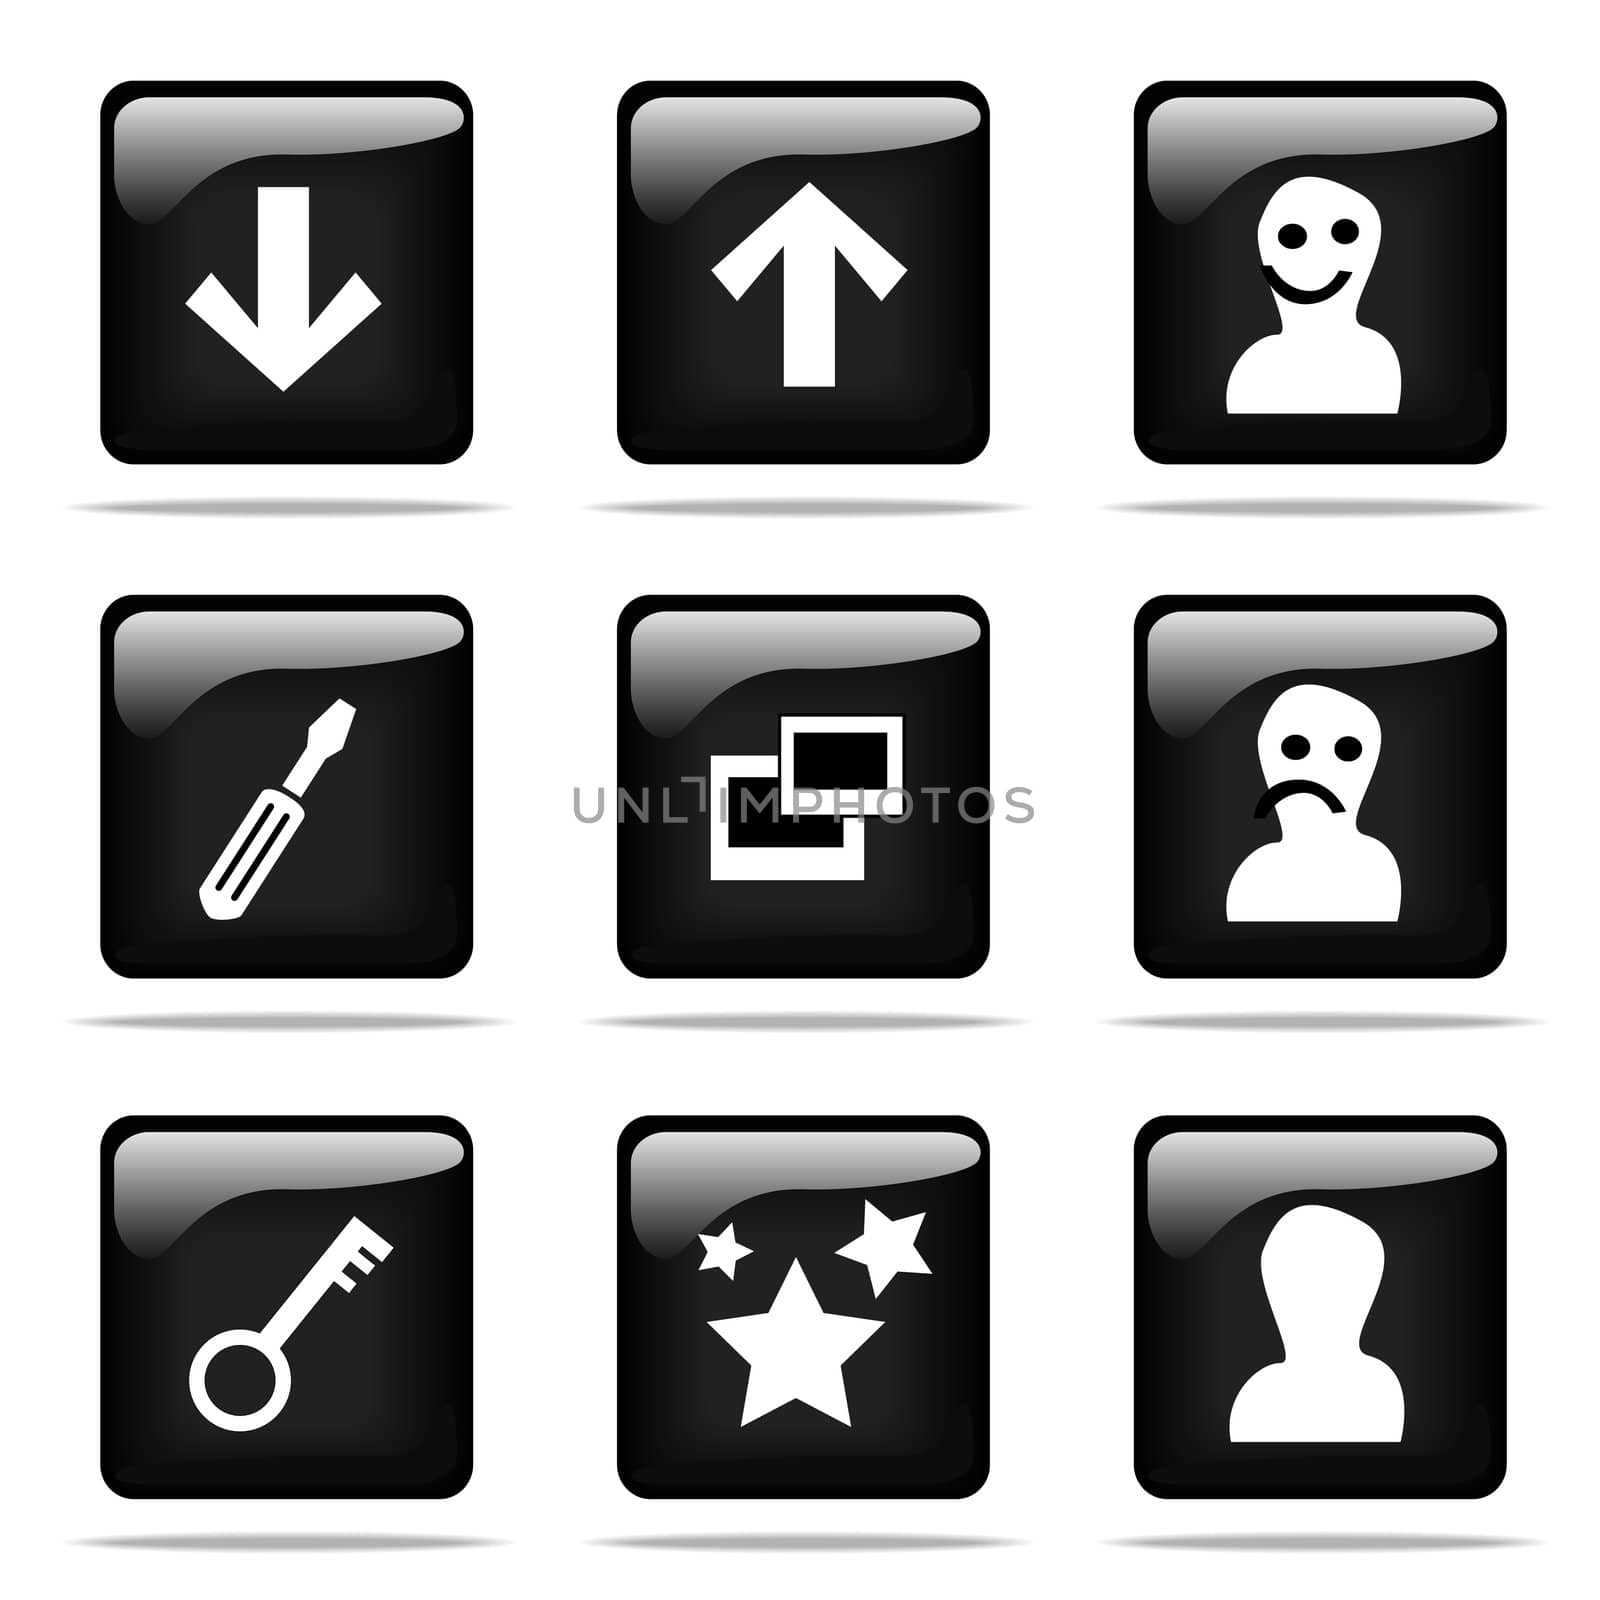 Set of glossy buttons with icons. Black and white series.